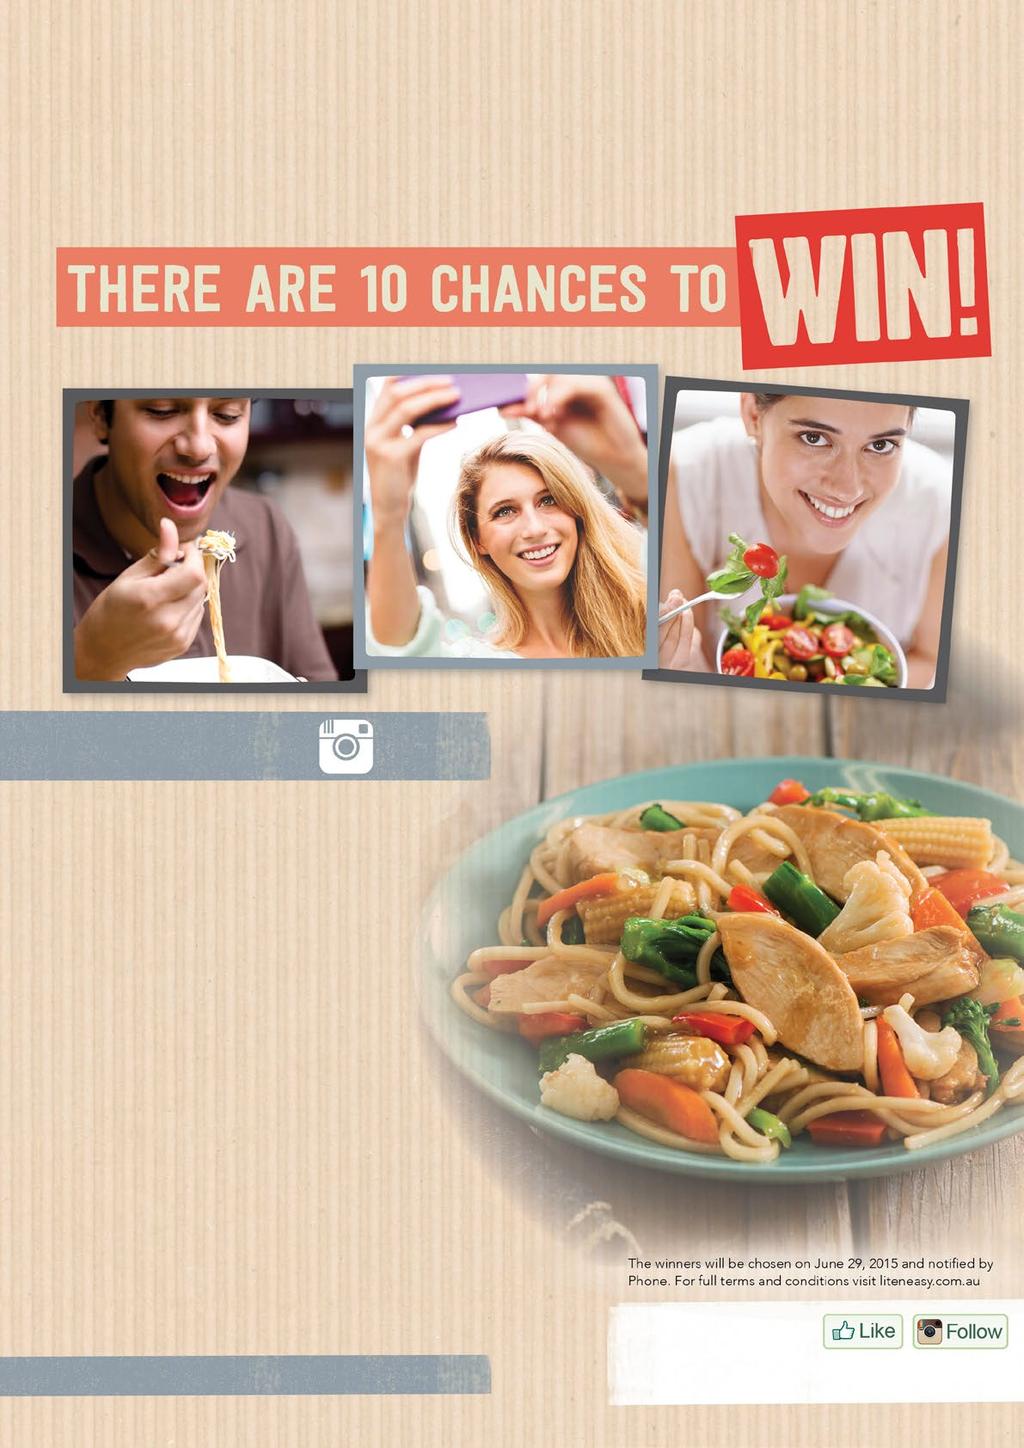 Selfie improvement! Snap a selfie for your chance to win two weeks free Lite N Easy To enter: 1 2 Snap yourself enjoying your Lite n Easy breakfast, lunch or dinner.